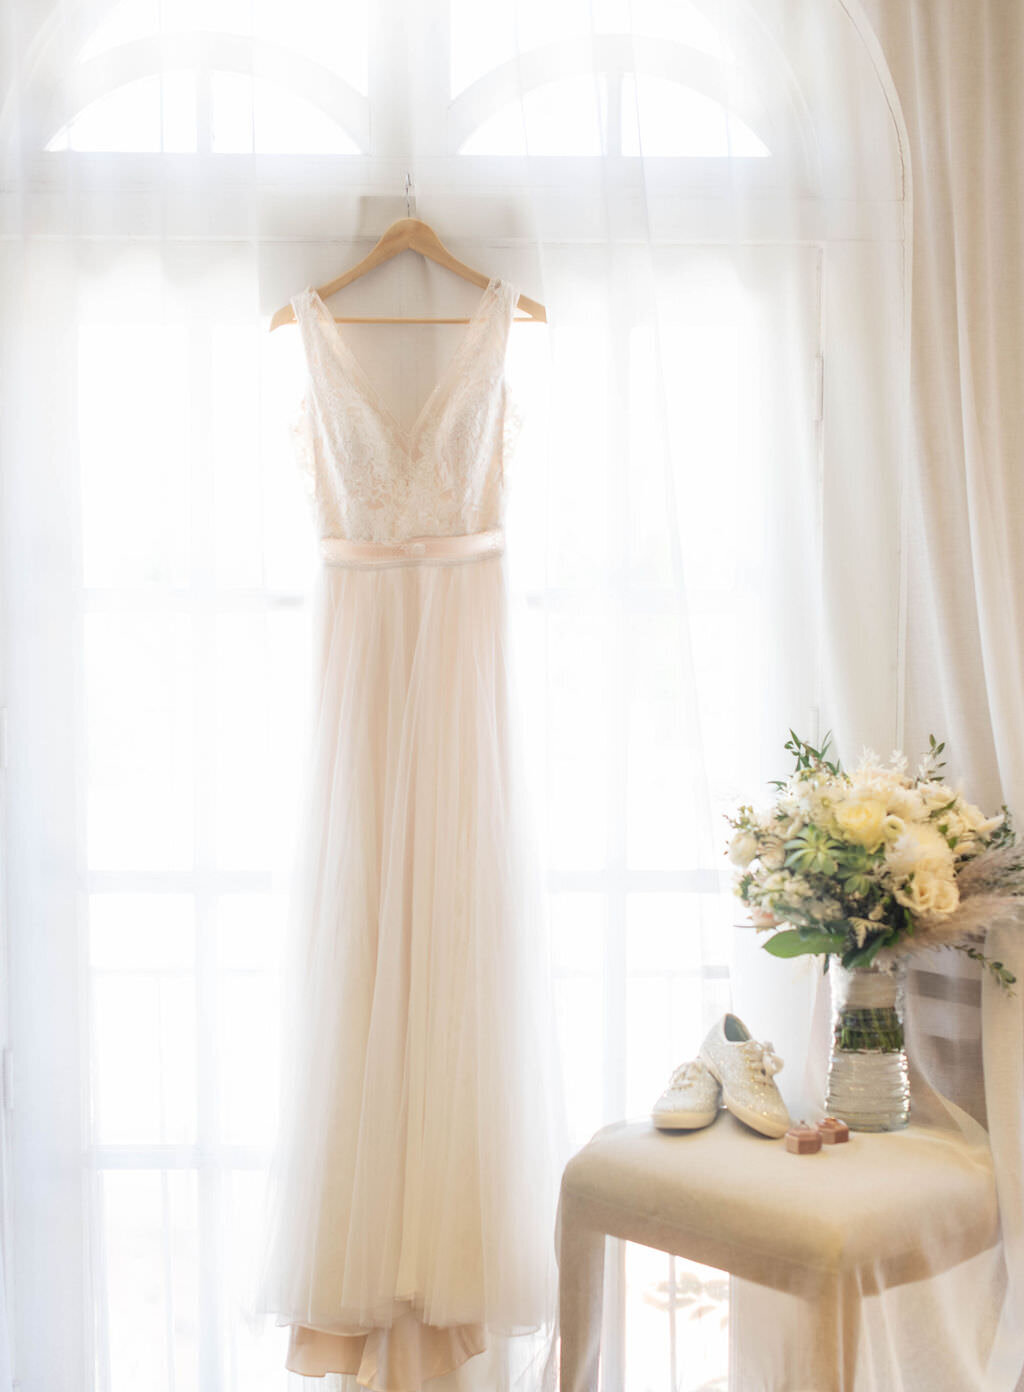 A white wedding dress hanging from a window